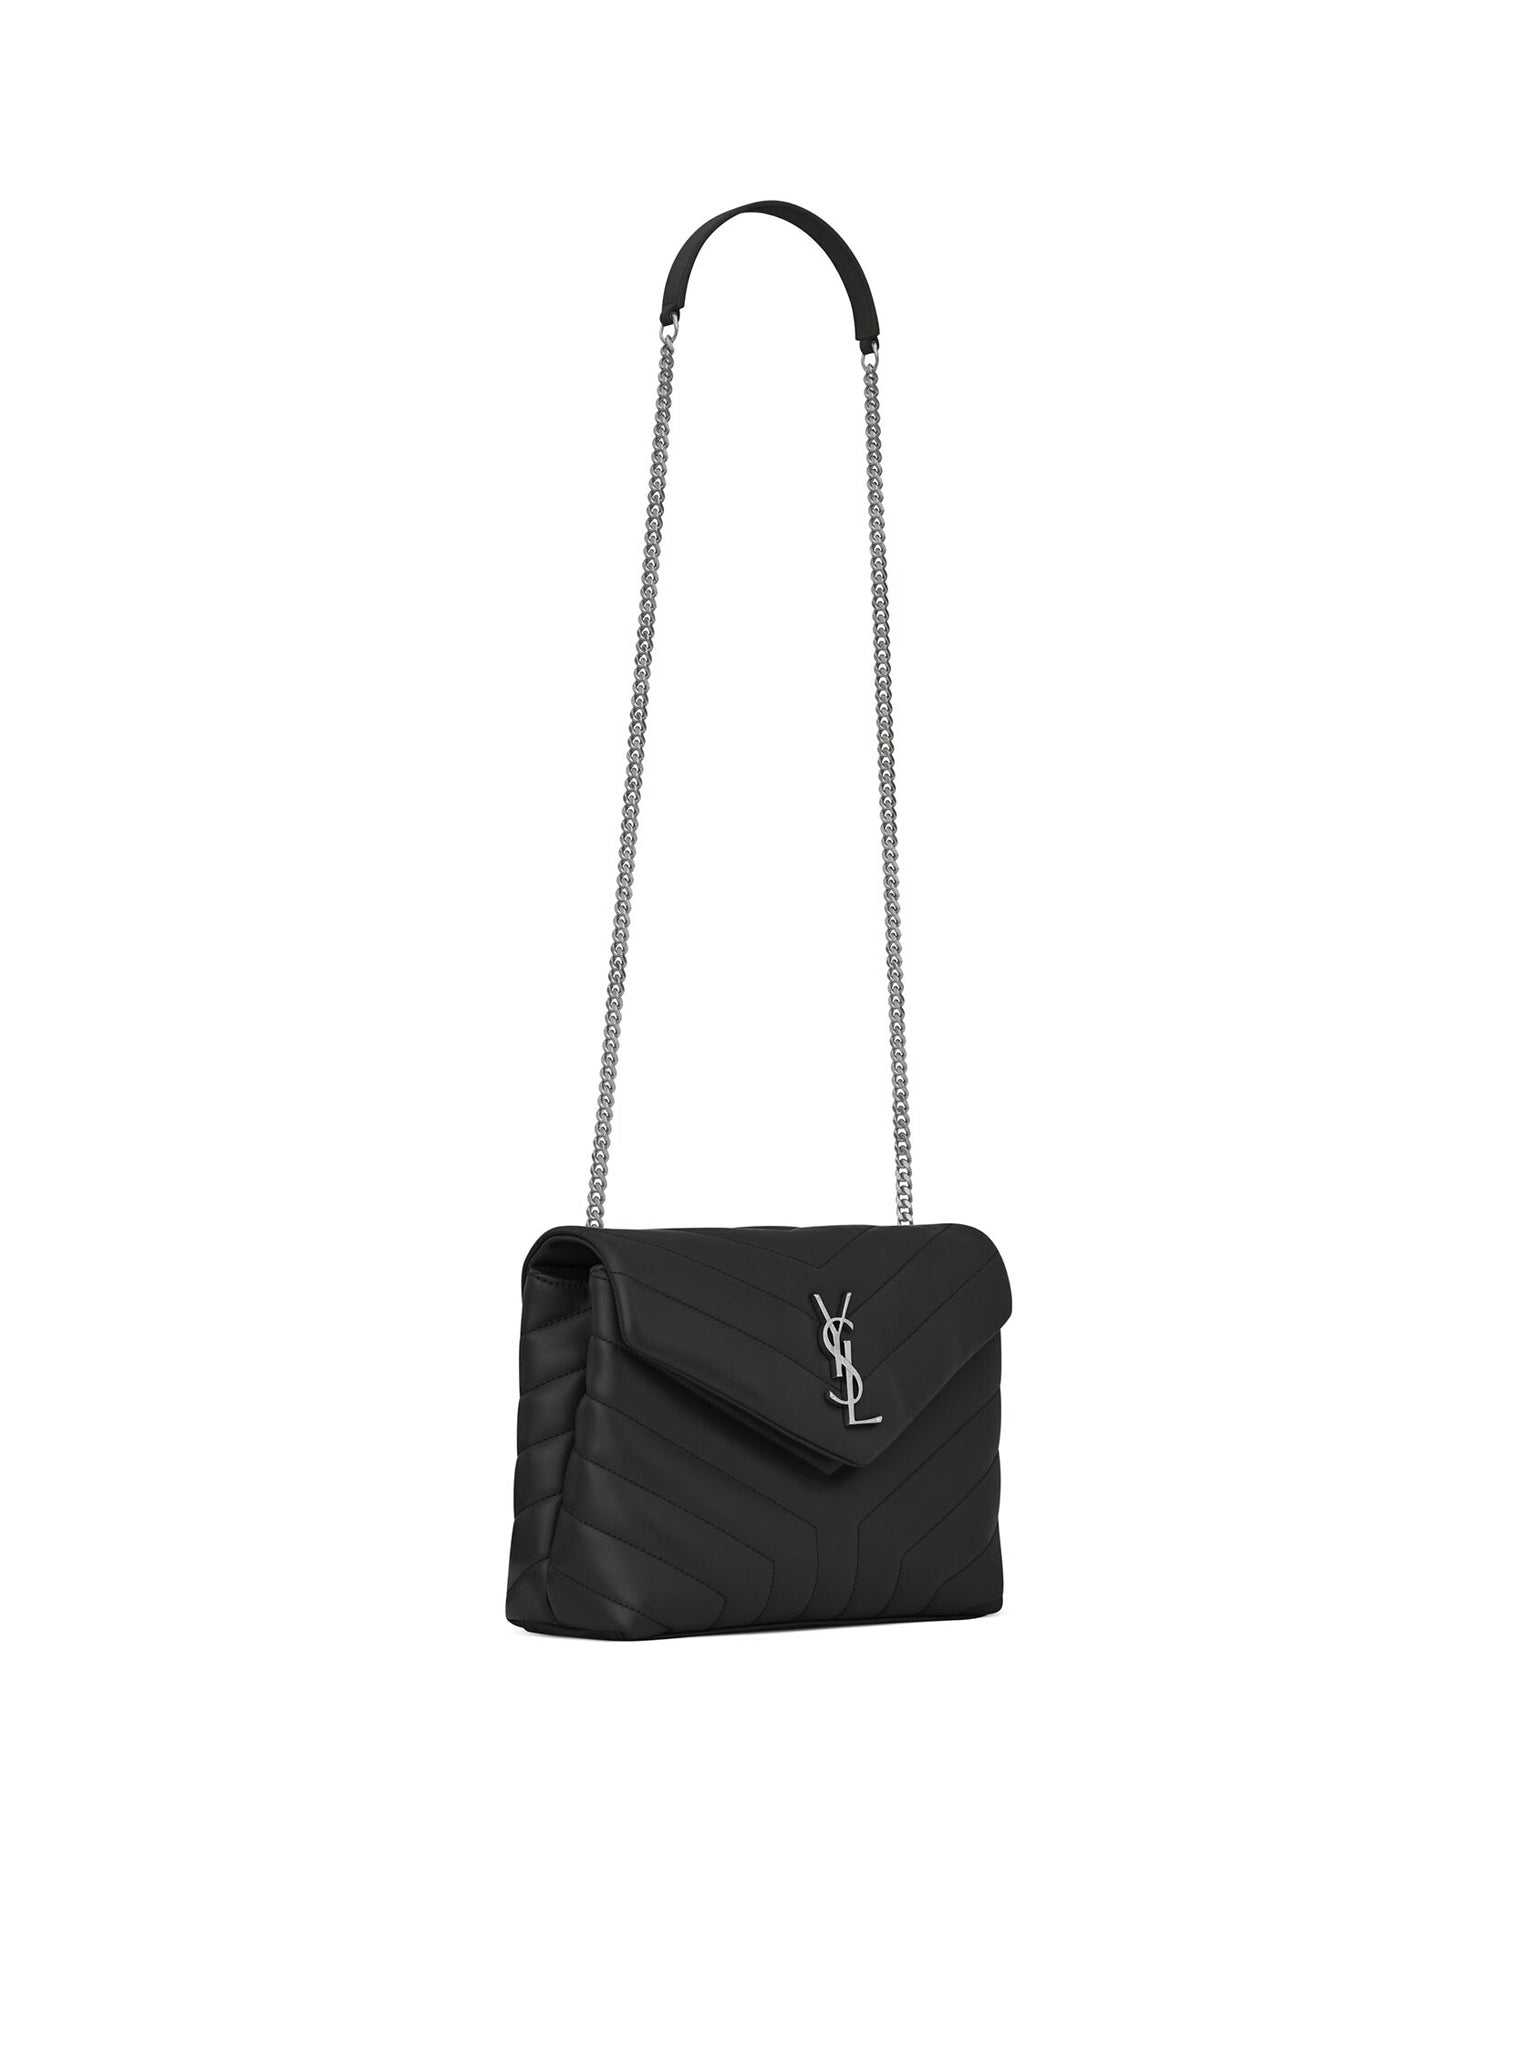 LOULOU SMALL BAG IN QUILTED "Y" LEATHER